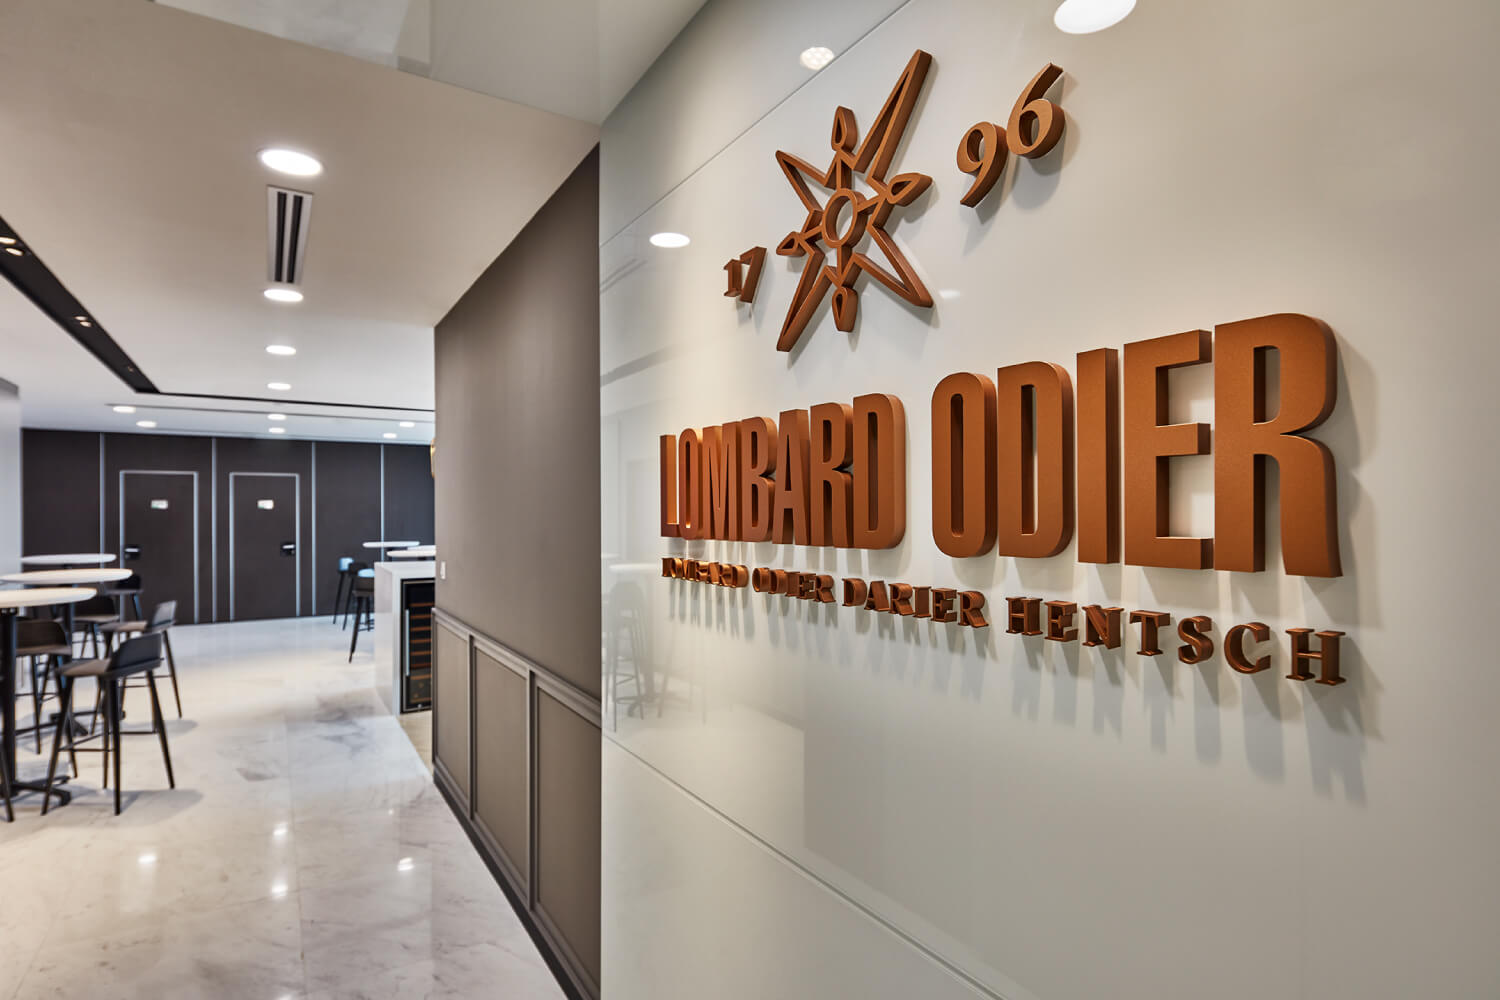 Is Lombard Odier Bank A Good Bank